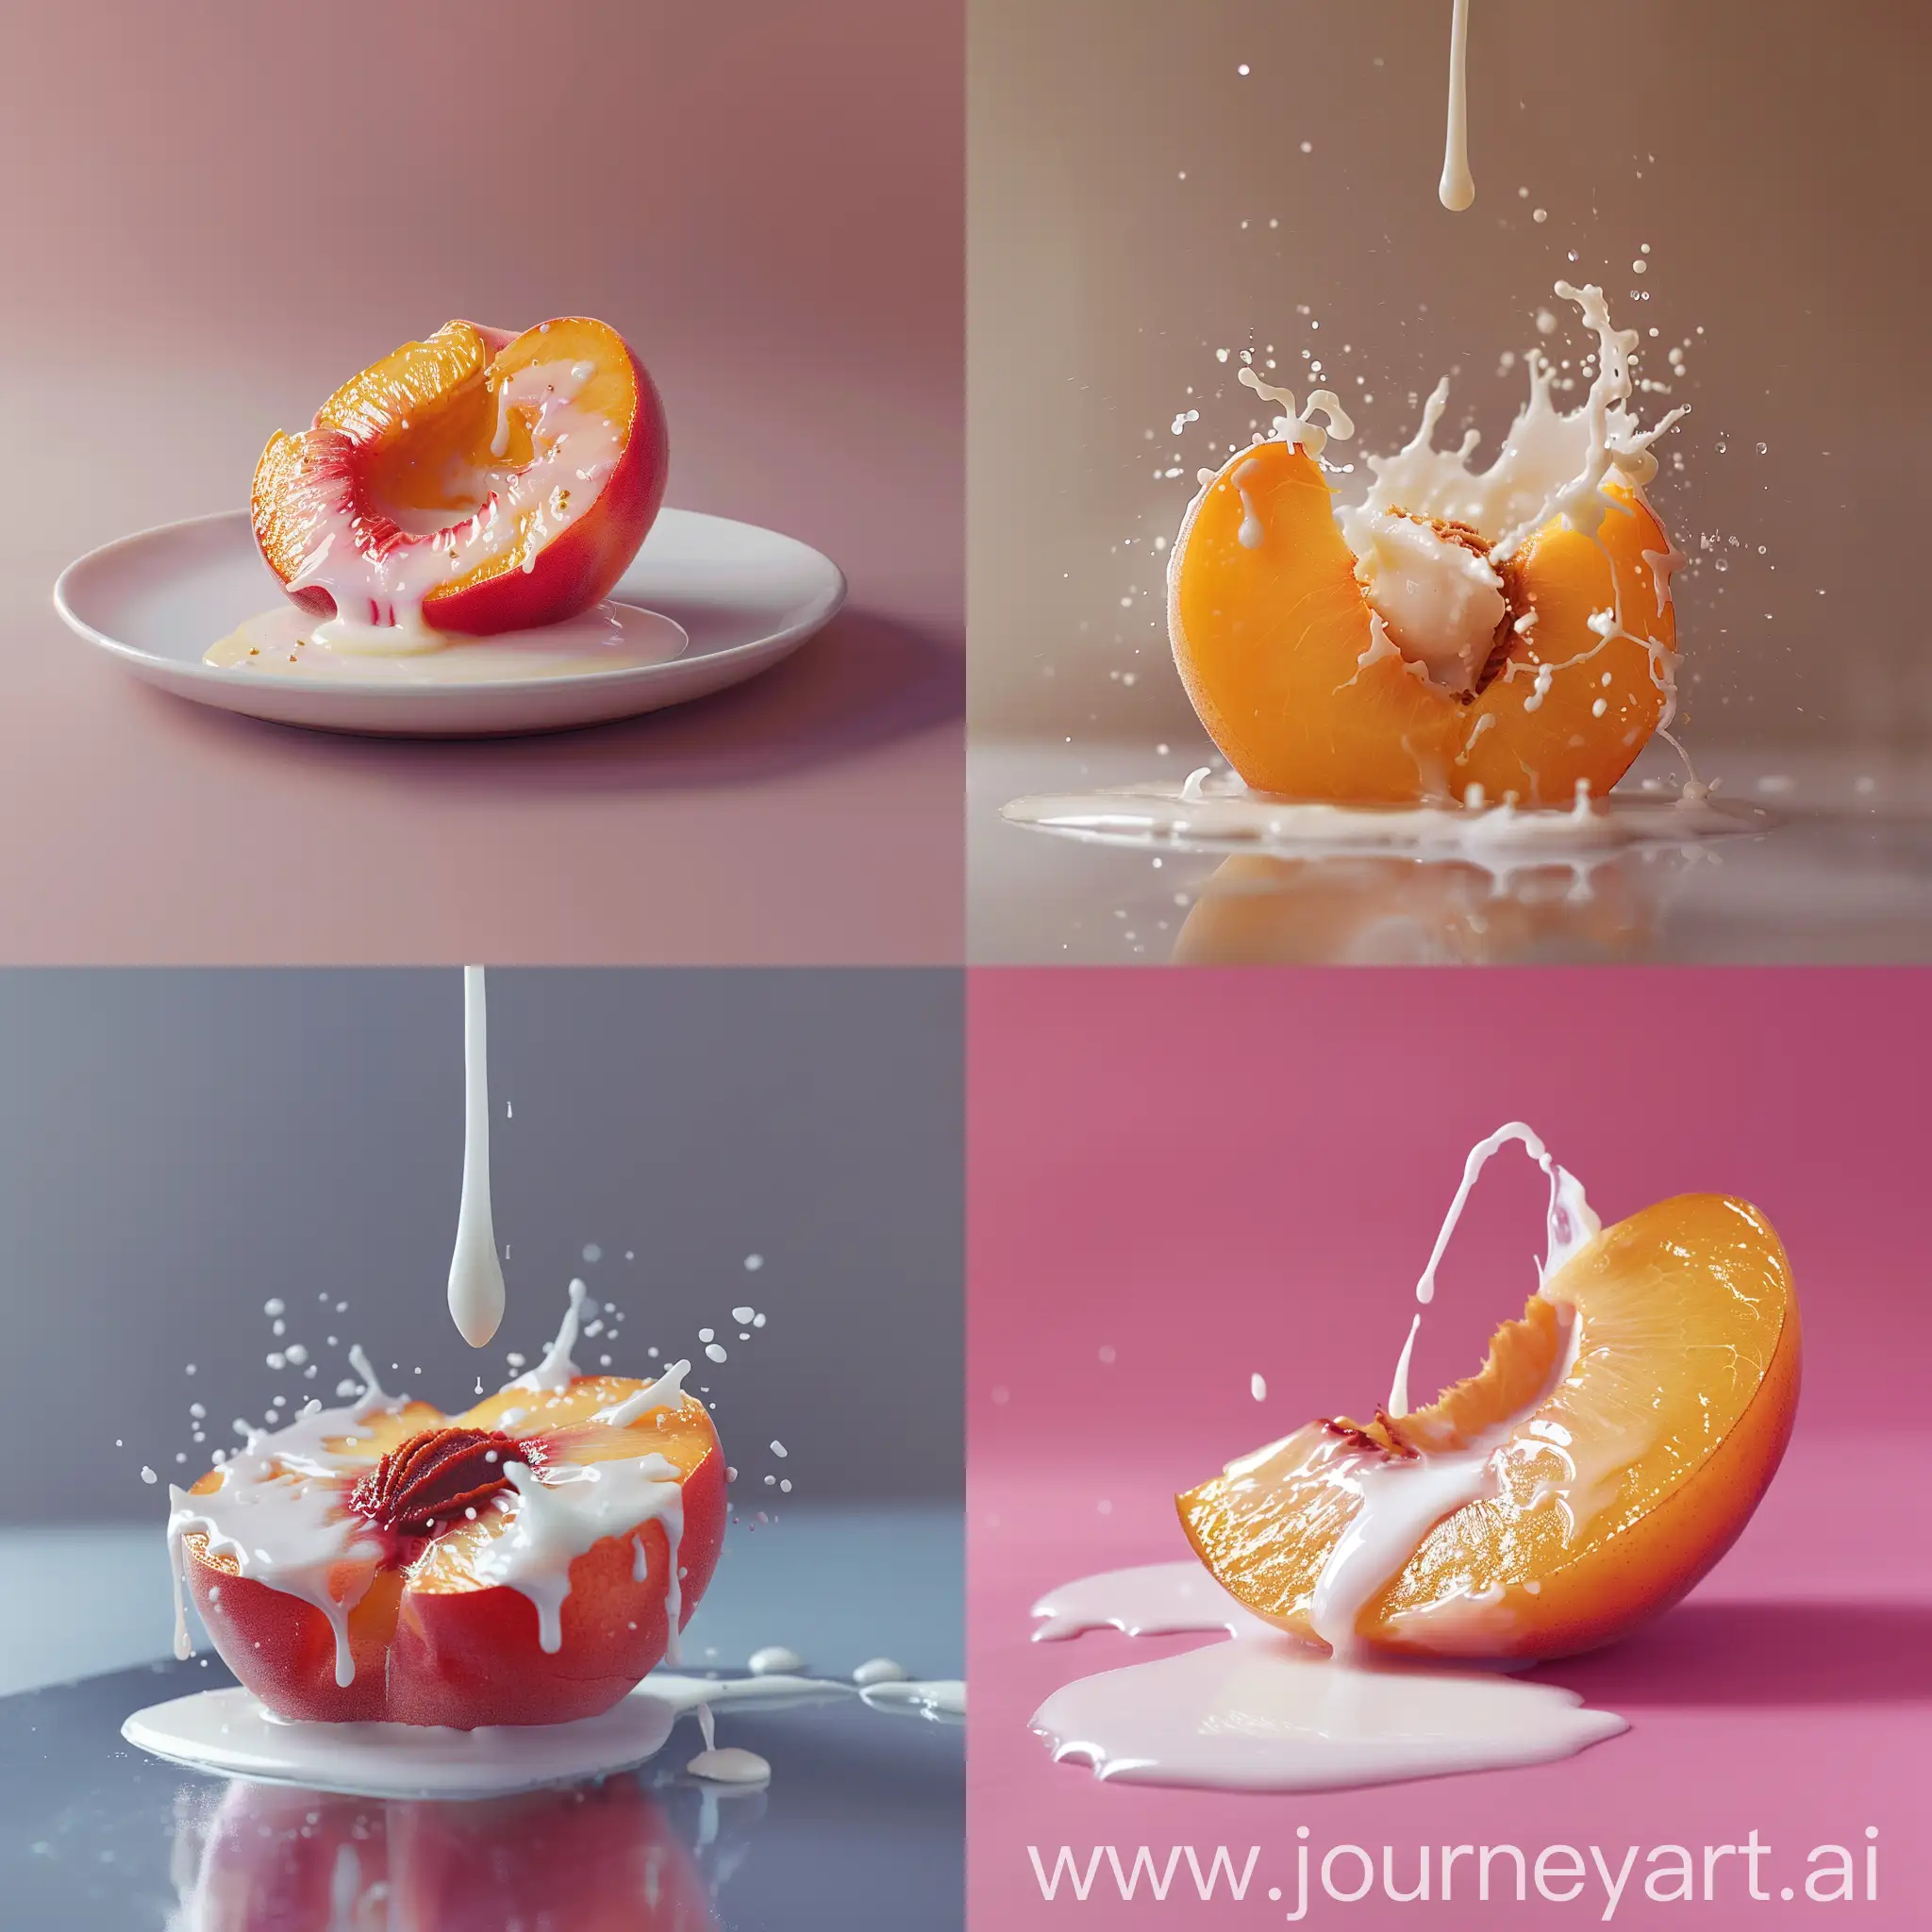 Peach-CrossSection-with-Dripping-Milk-Captivating-Hyperrealism-Food-Photography